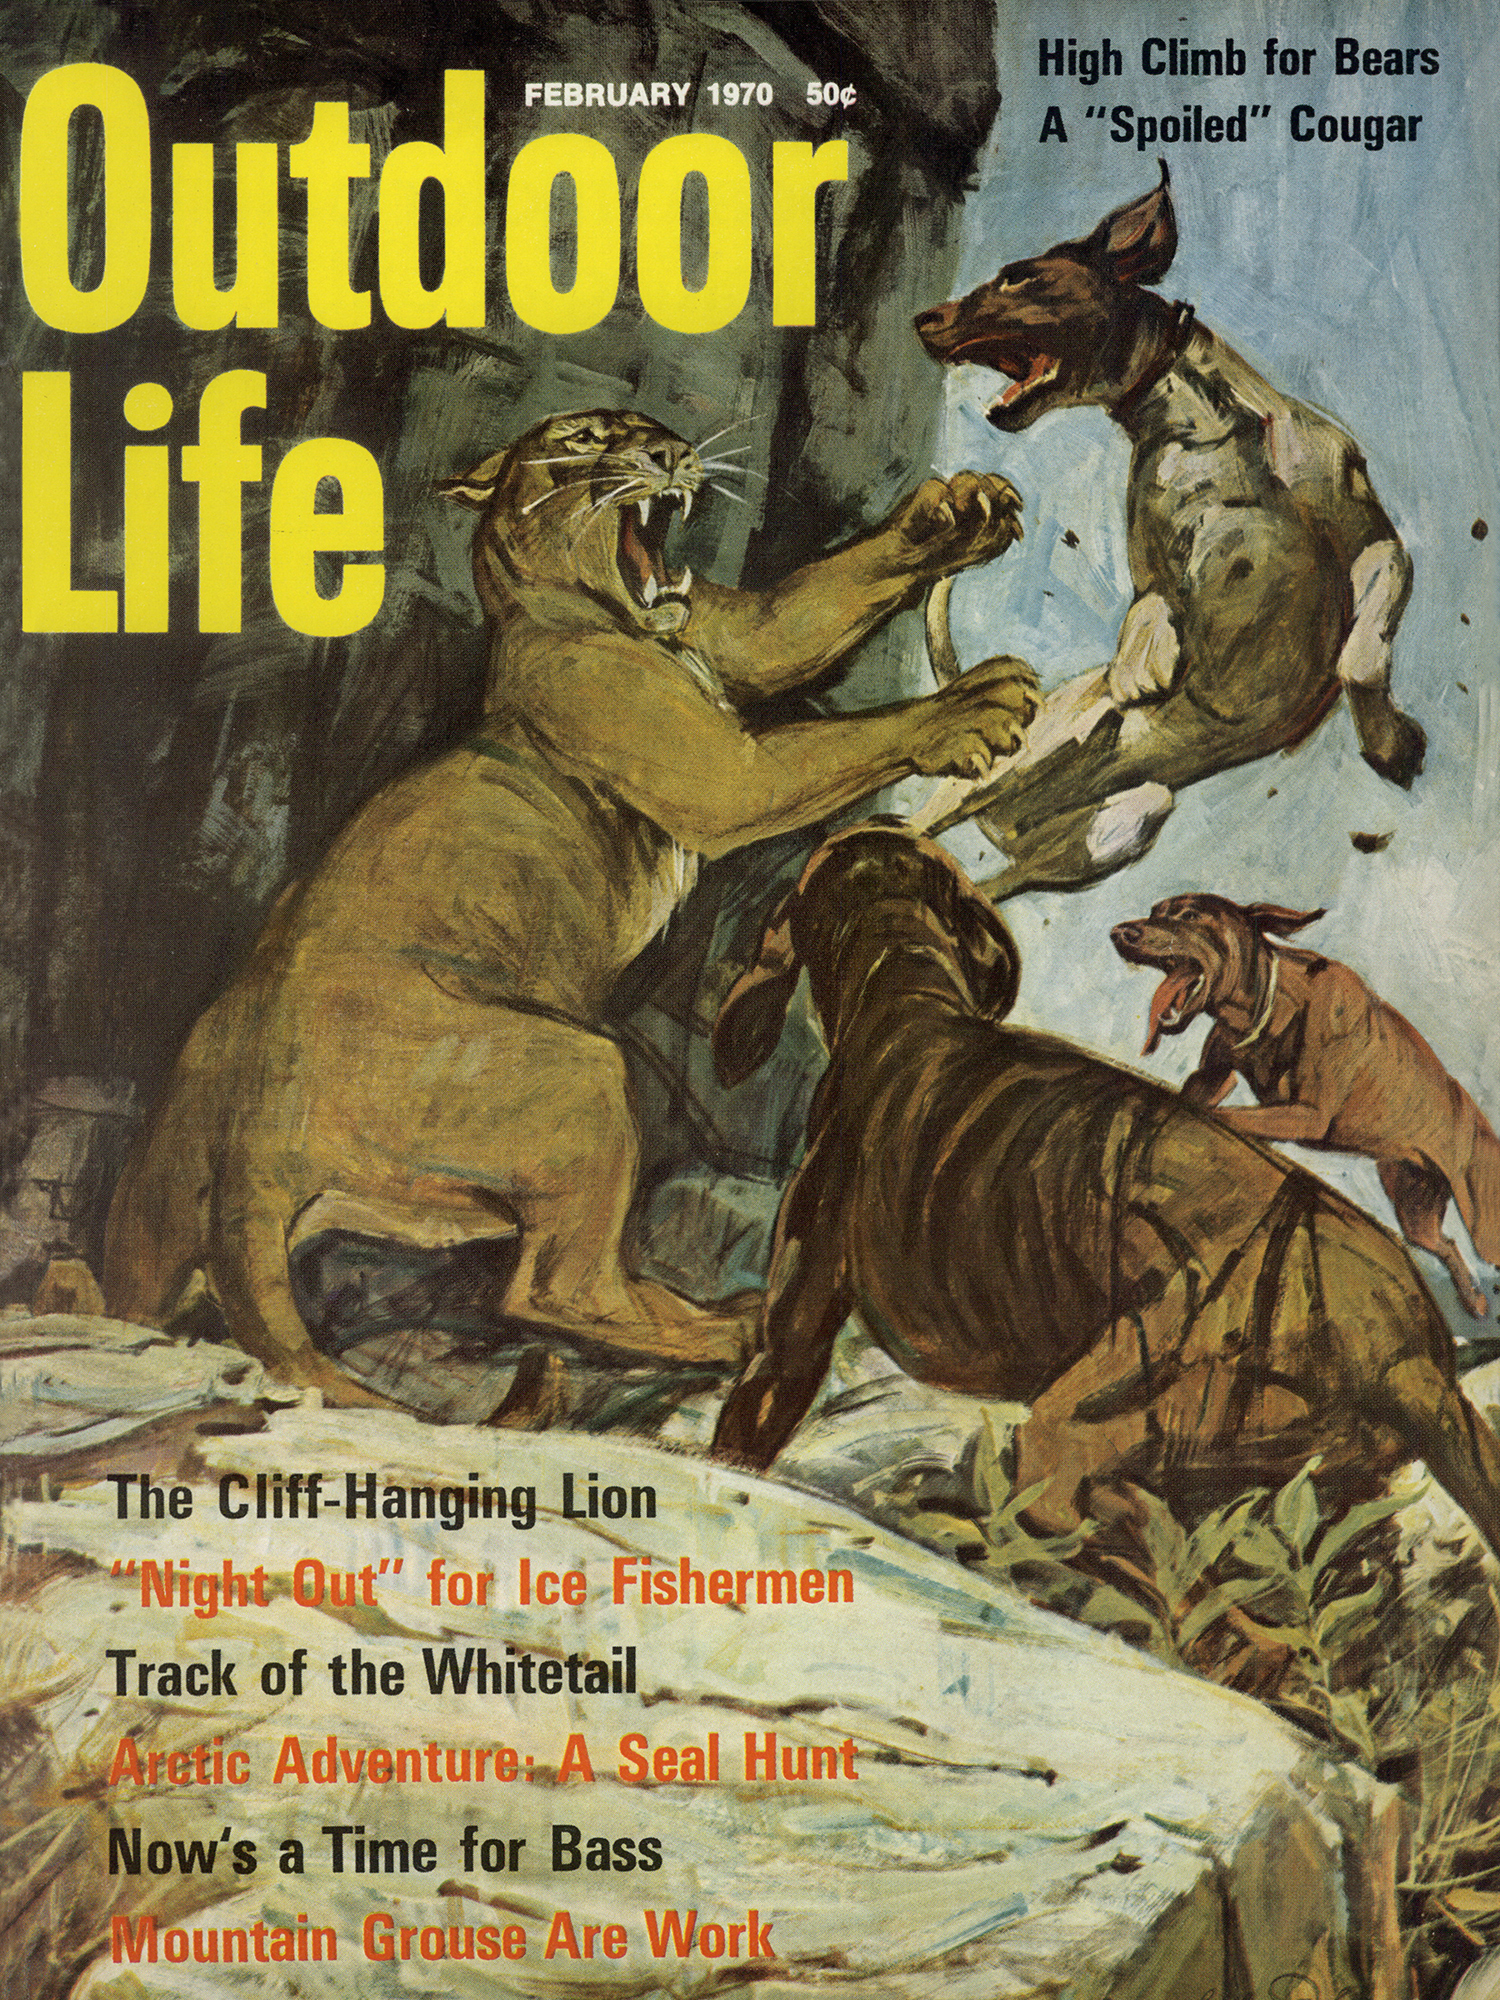 February 1970: A modern tribute to a common early cover subject—a bayed lion and loyal hounds.